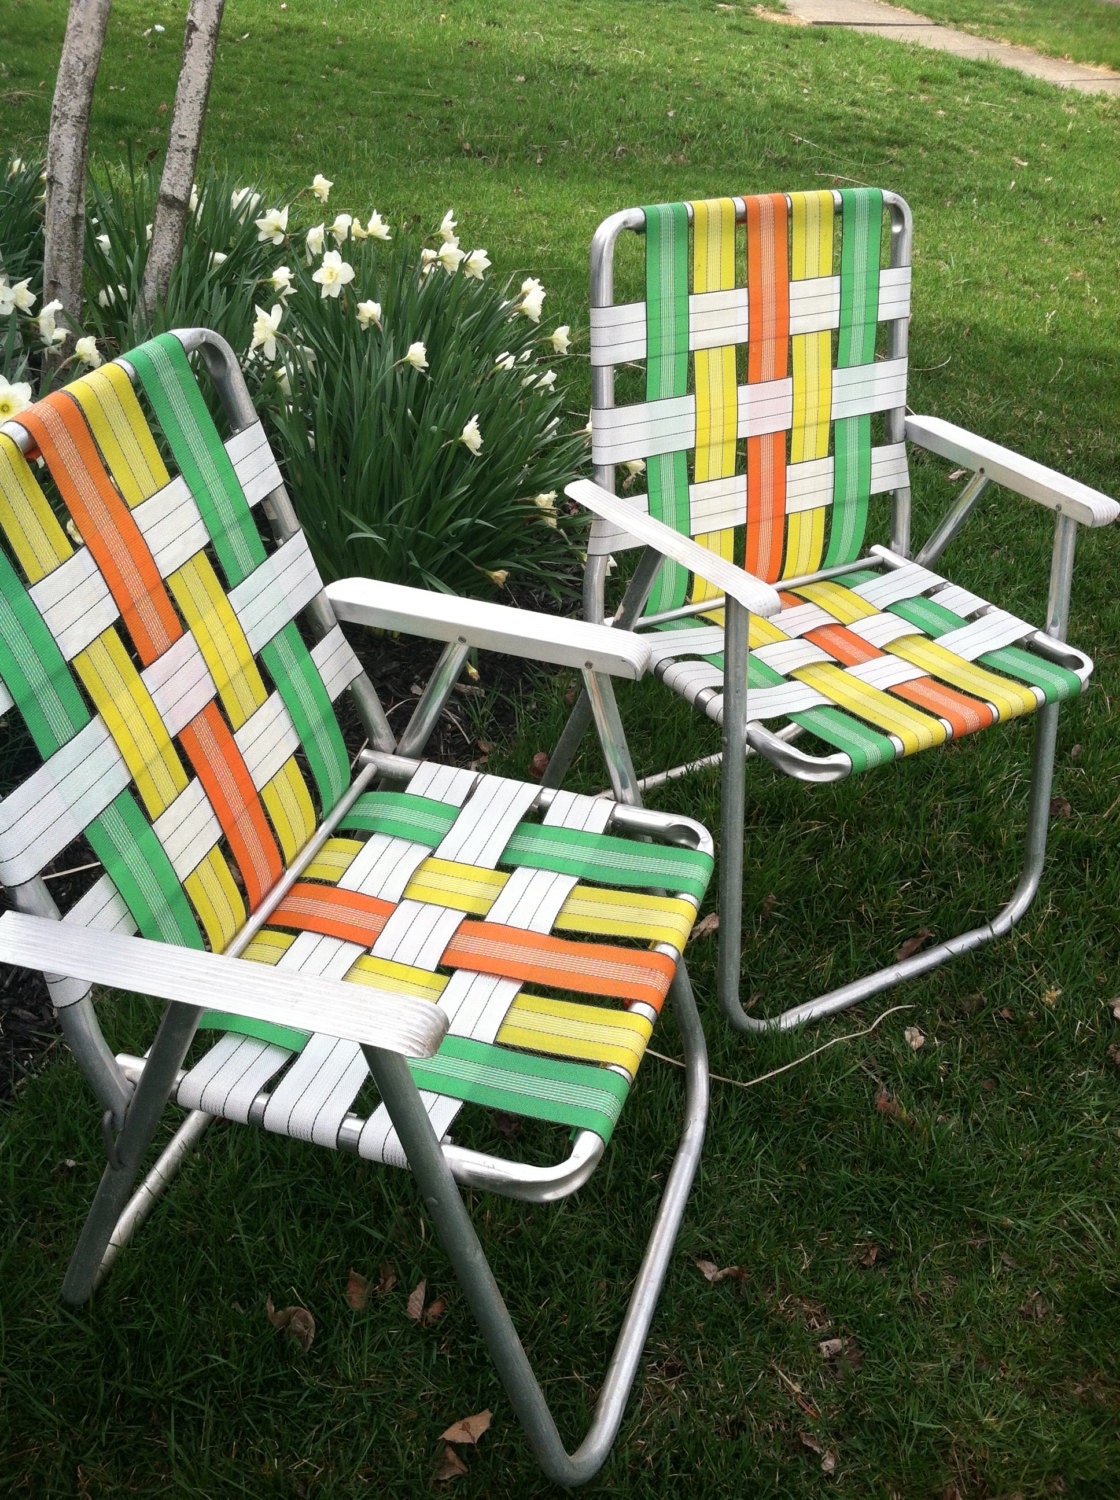 RESERVED Listing for D Retro Folding Lawn Chairs Set of 2